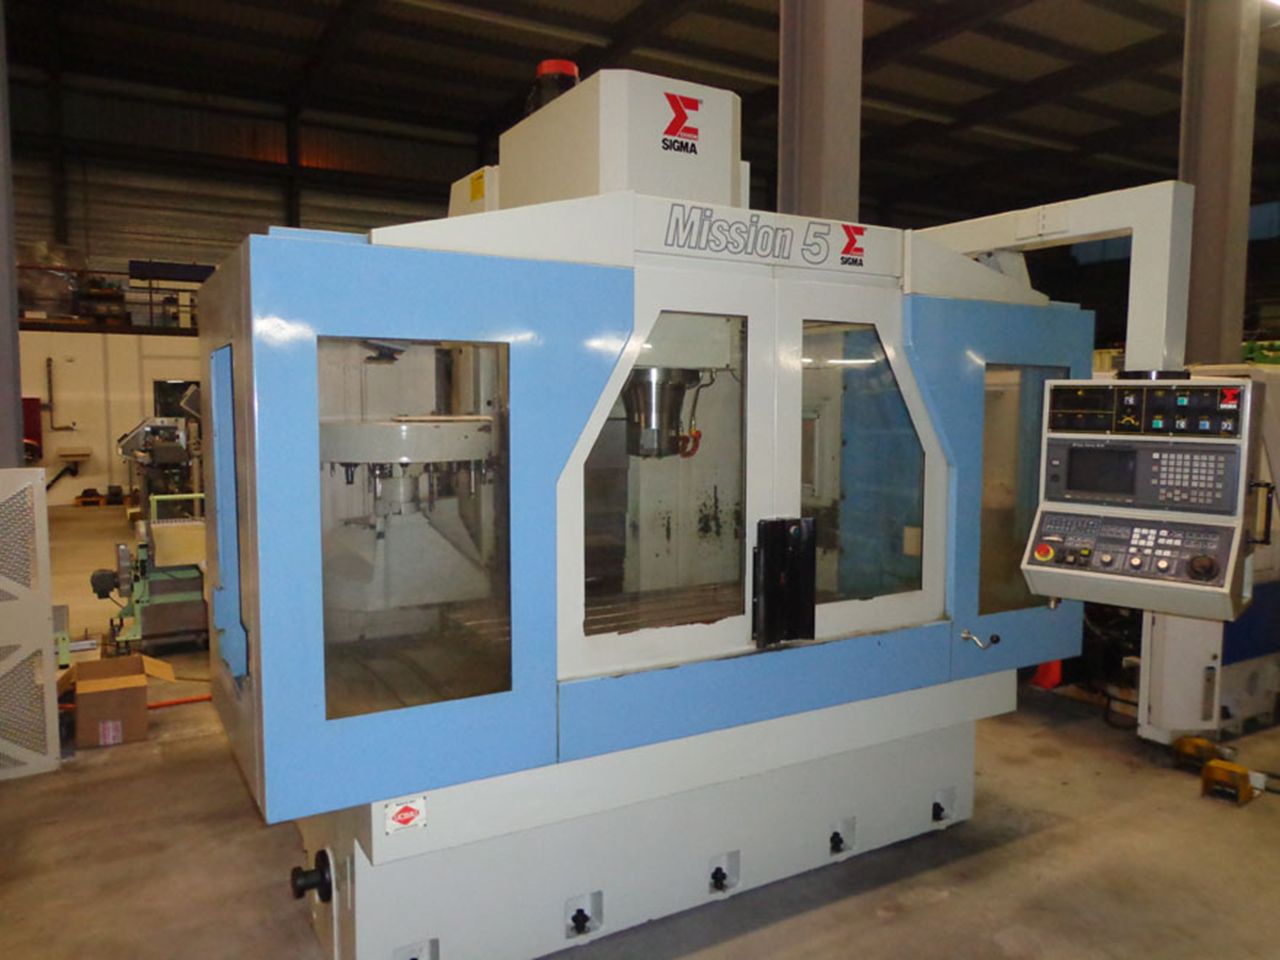 Five-axis Machining Centres/MACHINING CENTER sigma Mission 5-M